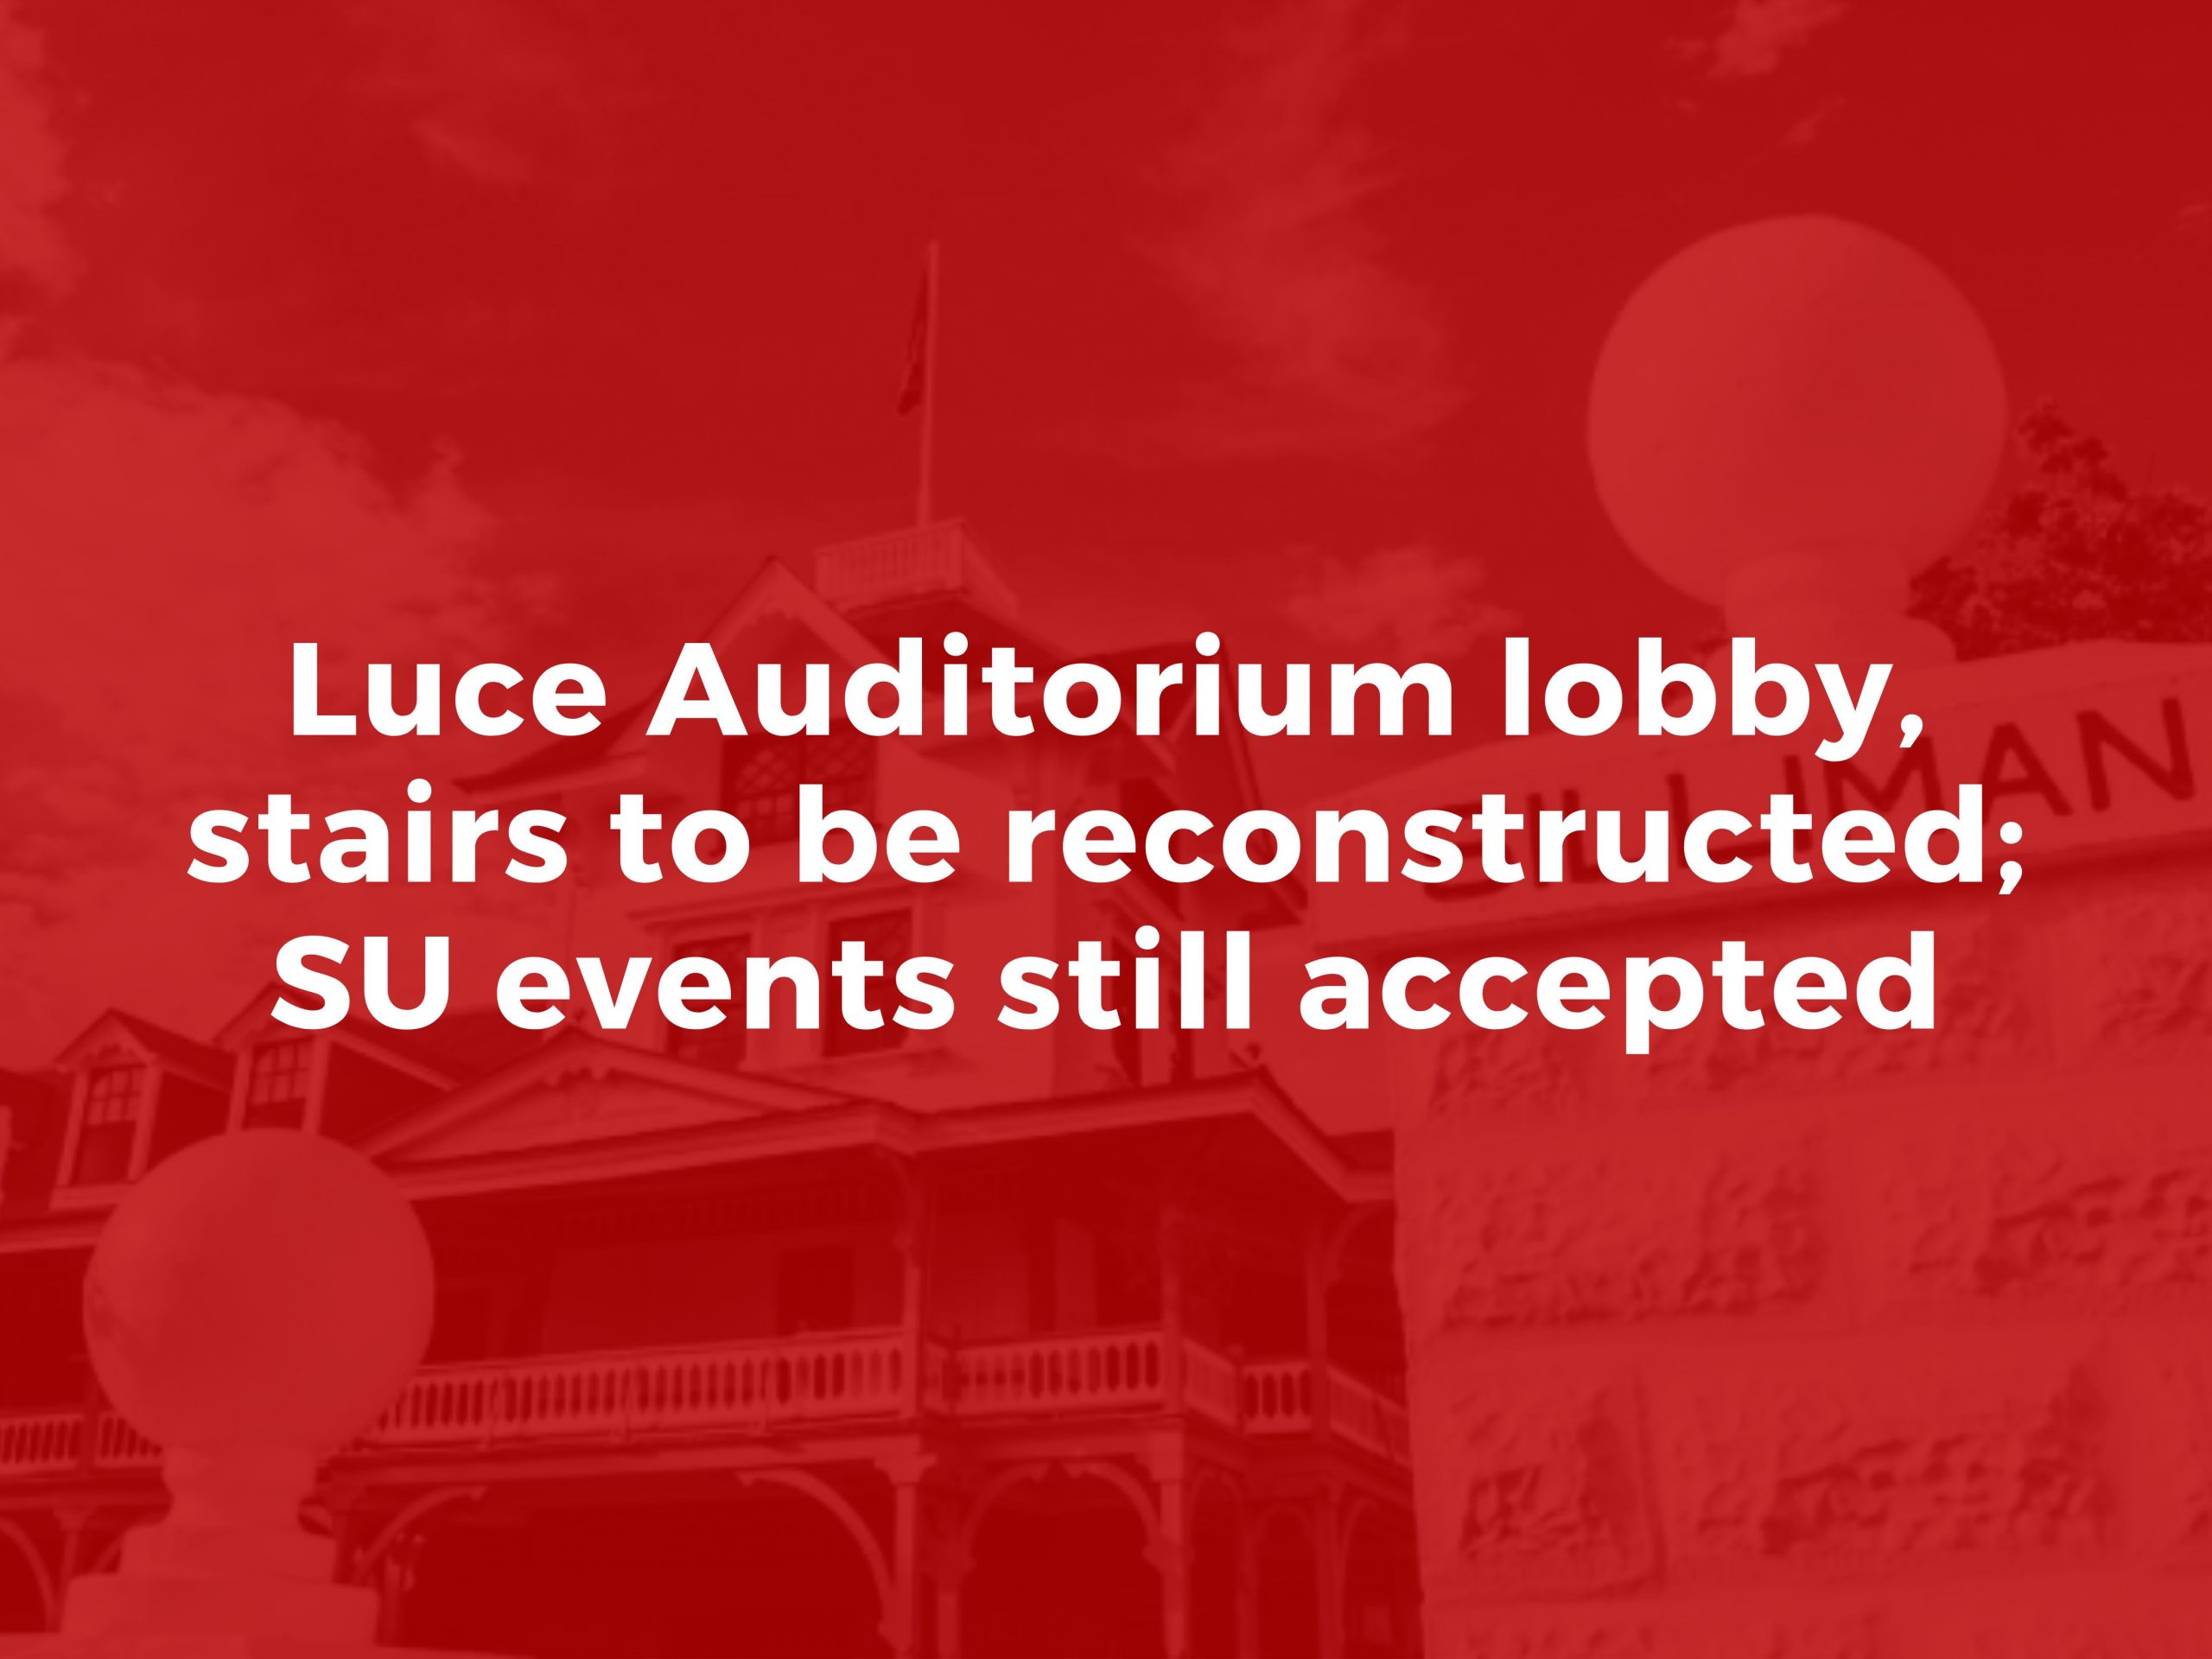 Announcement: Luce Auditorium lobby, stairs to be reconstructed; SU events still accepted